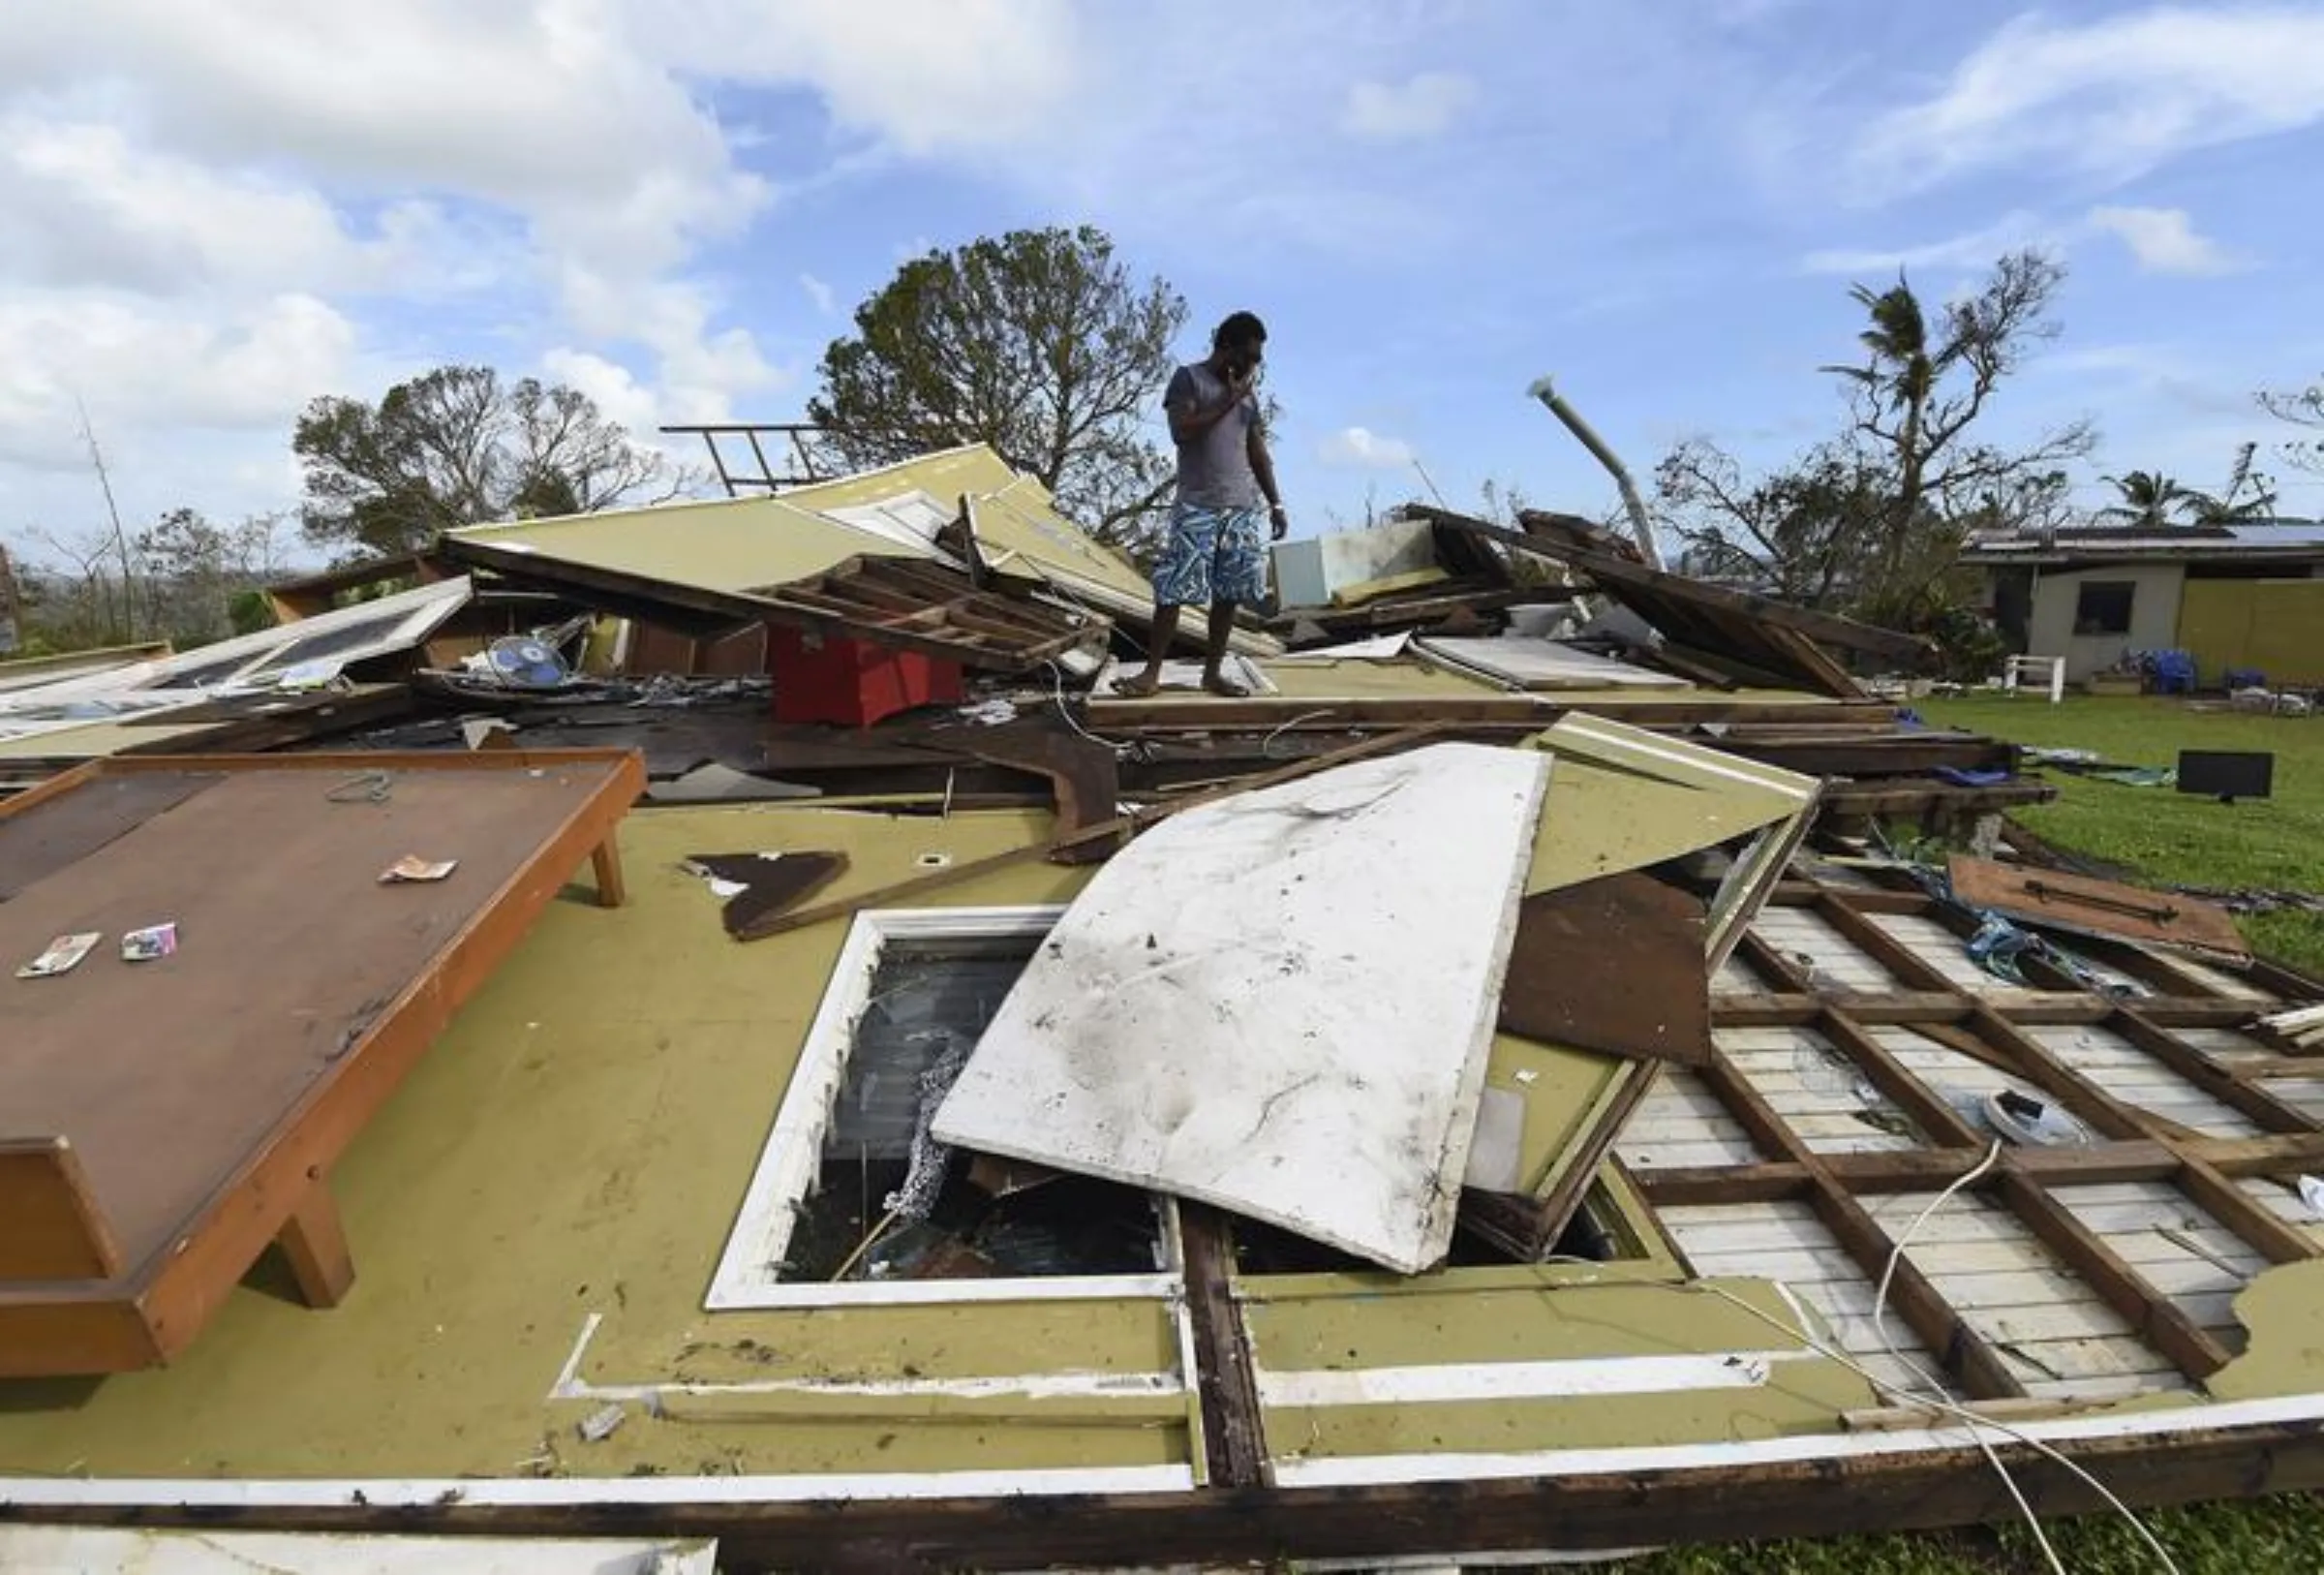 Local resident Adrian Banga looks at his home destroyed by Cyclone Pam in Port Vila, the capital city of the Pacific island nation of Vanuatu March 16, 2015. Reuters/File Photo